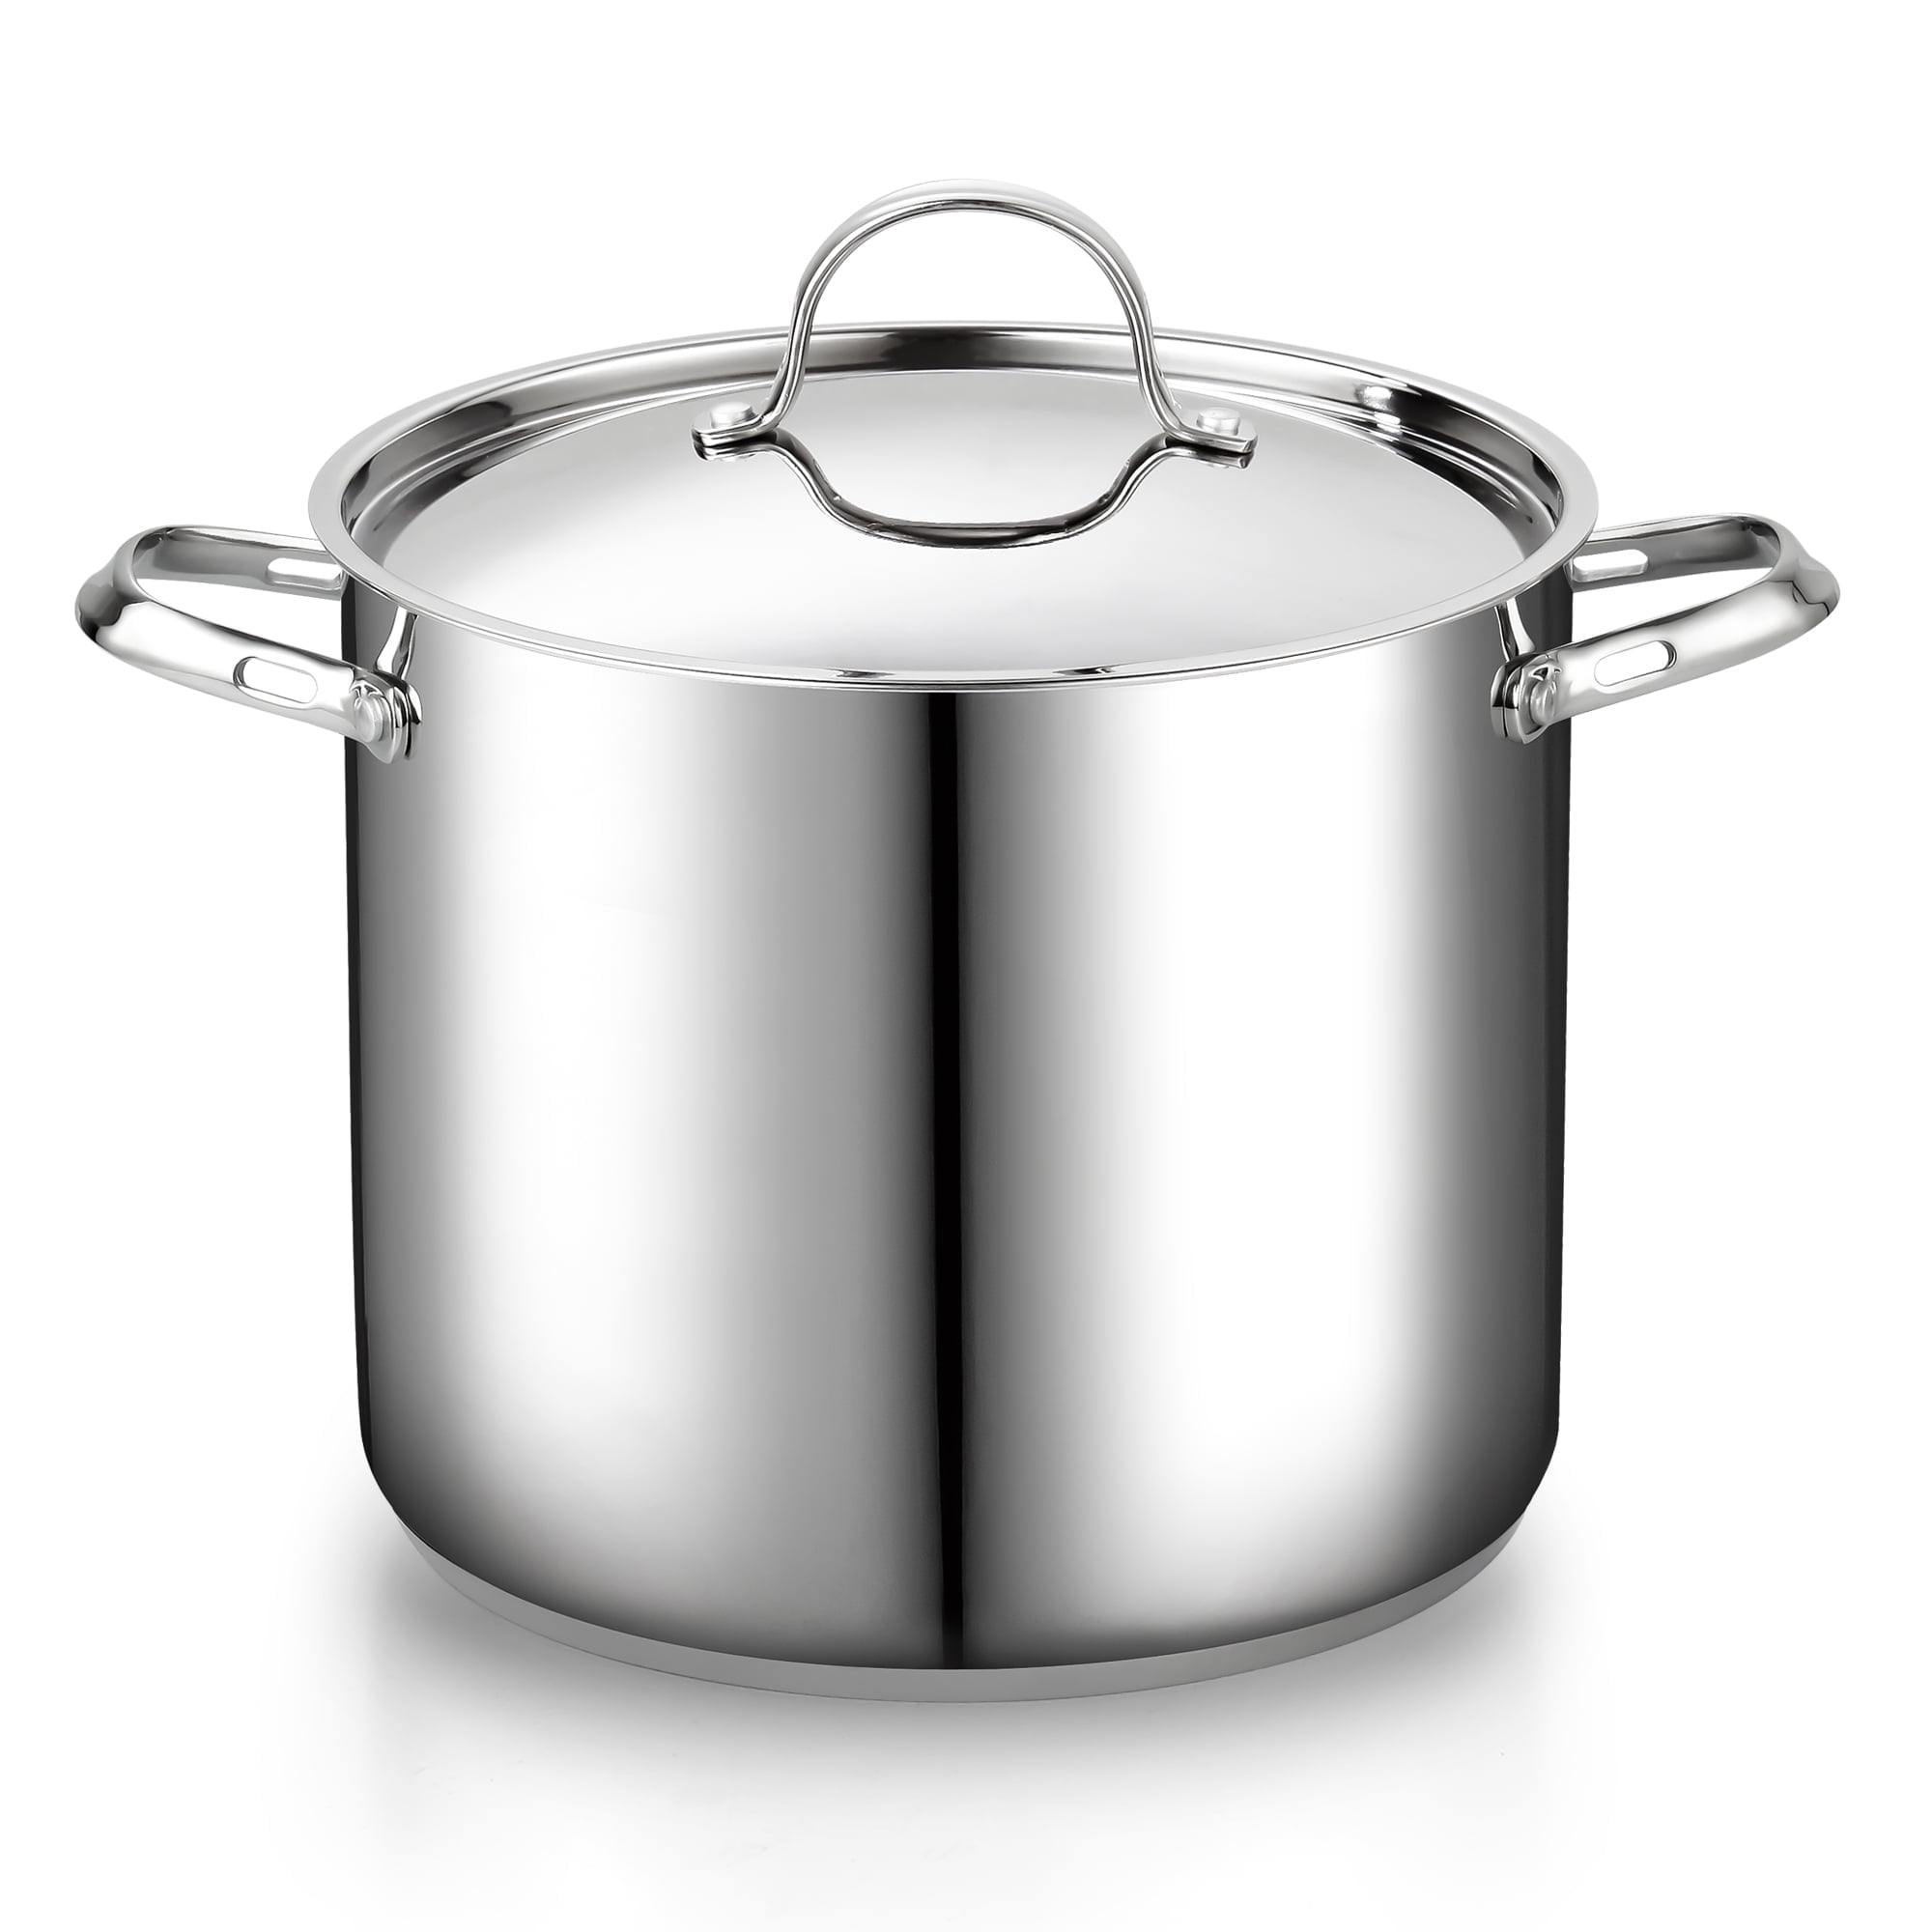 Cooks Standard 18/10 Stainless Steel Stockpot 12-Quart, Classic Deep  Cooking Pot Canning Cookware with Stainless Steel Lid, Silver